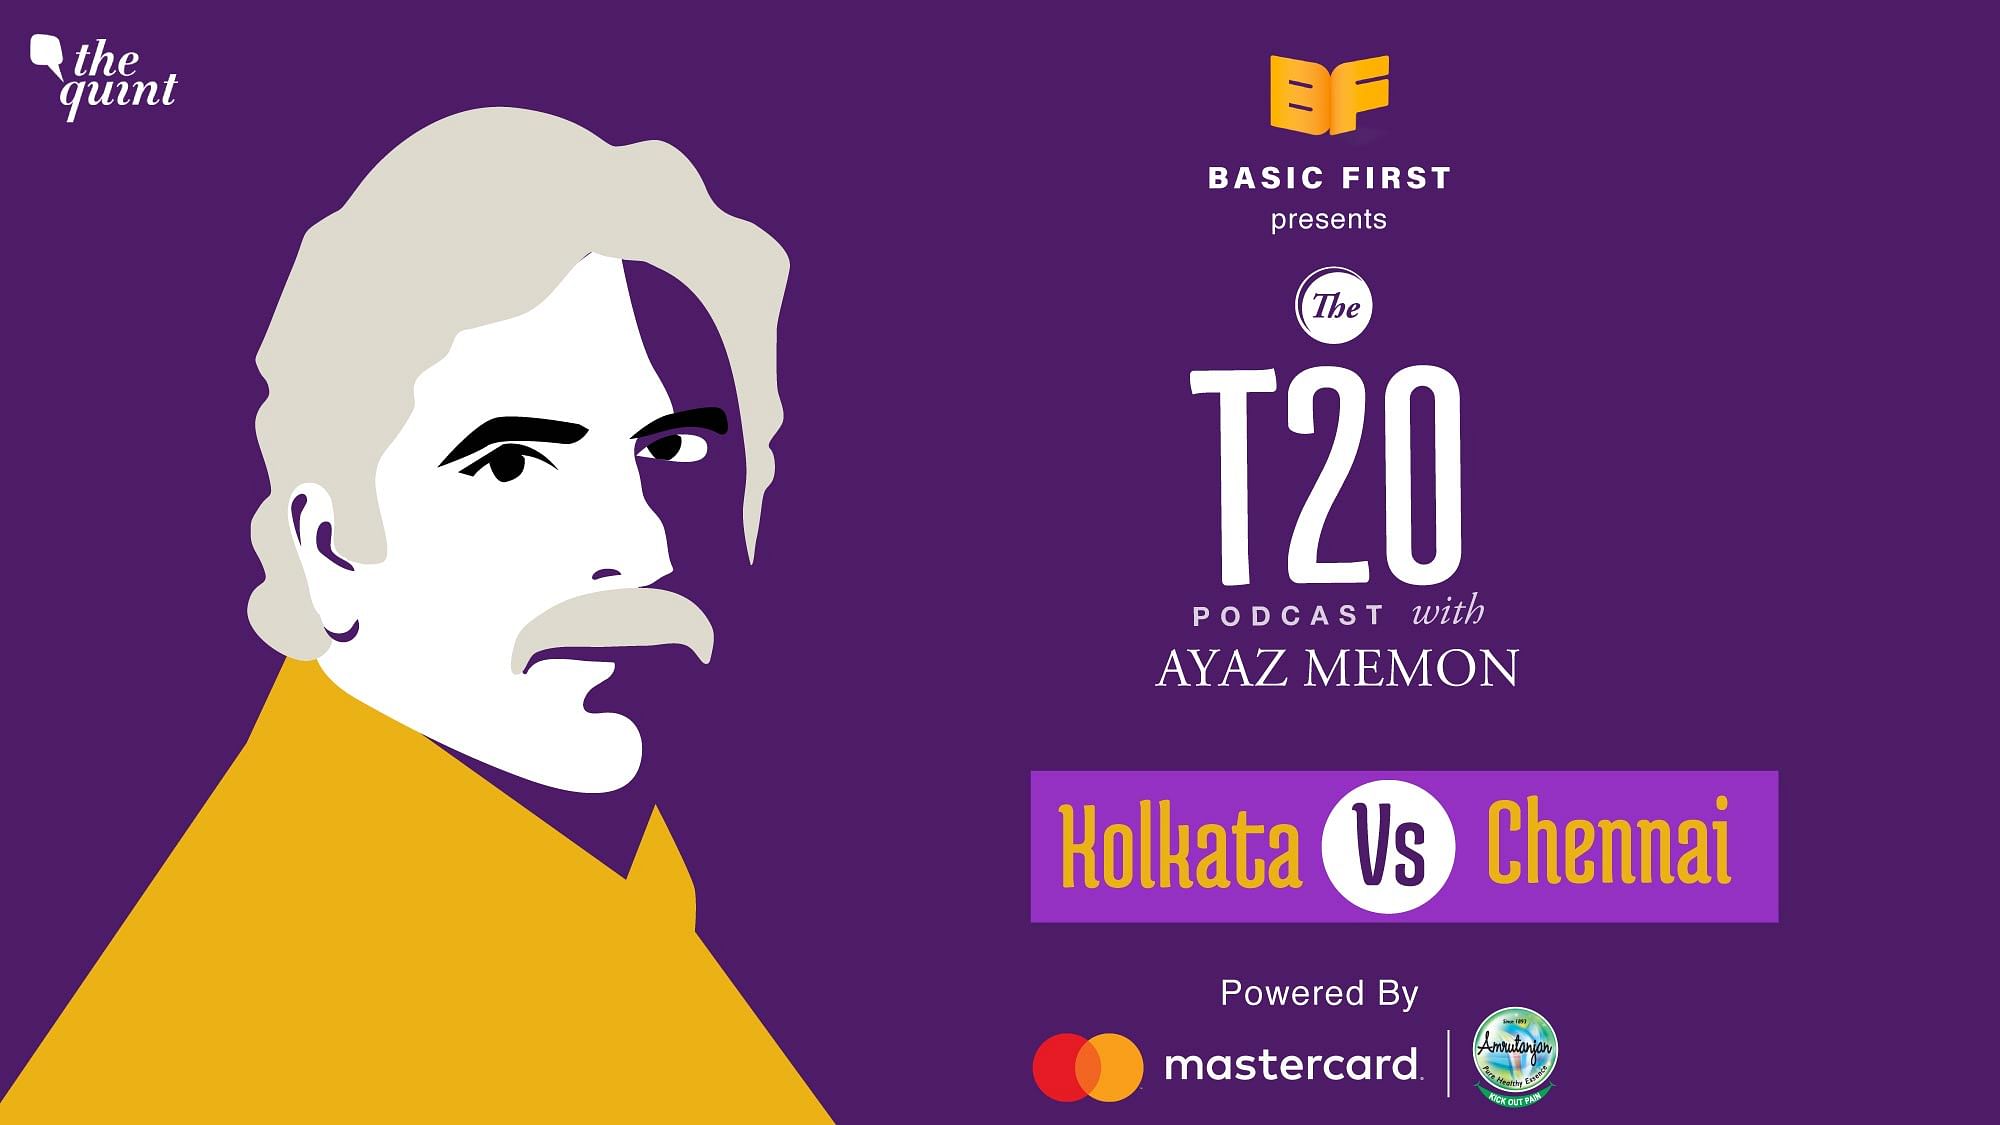 On Episode 49 of The T20 Podcast, Ayaz Memon and Mendra Dorjey talk about Chennai’s 6 wicket win over Kolkata that has severely dented their qualification chances.